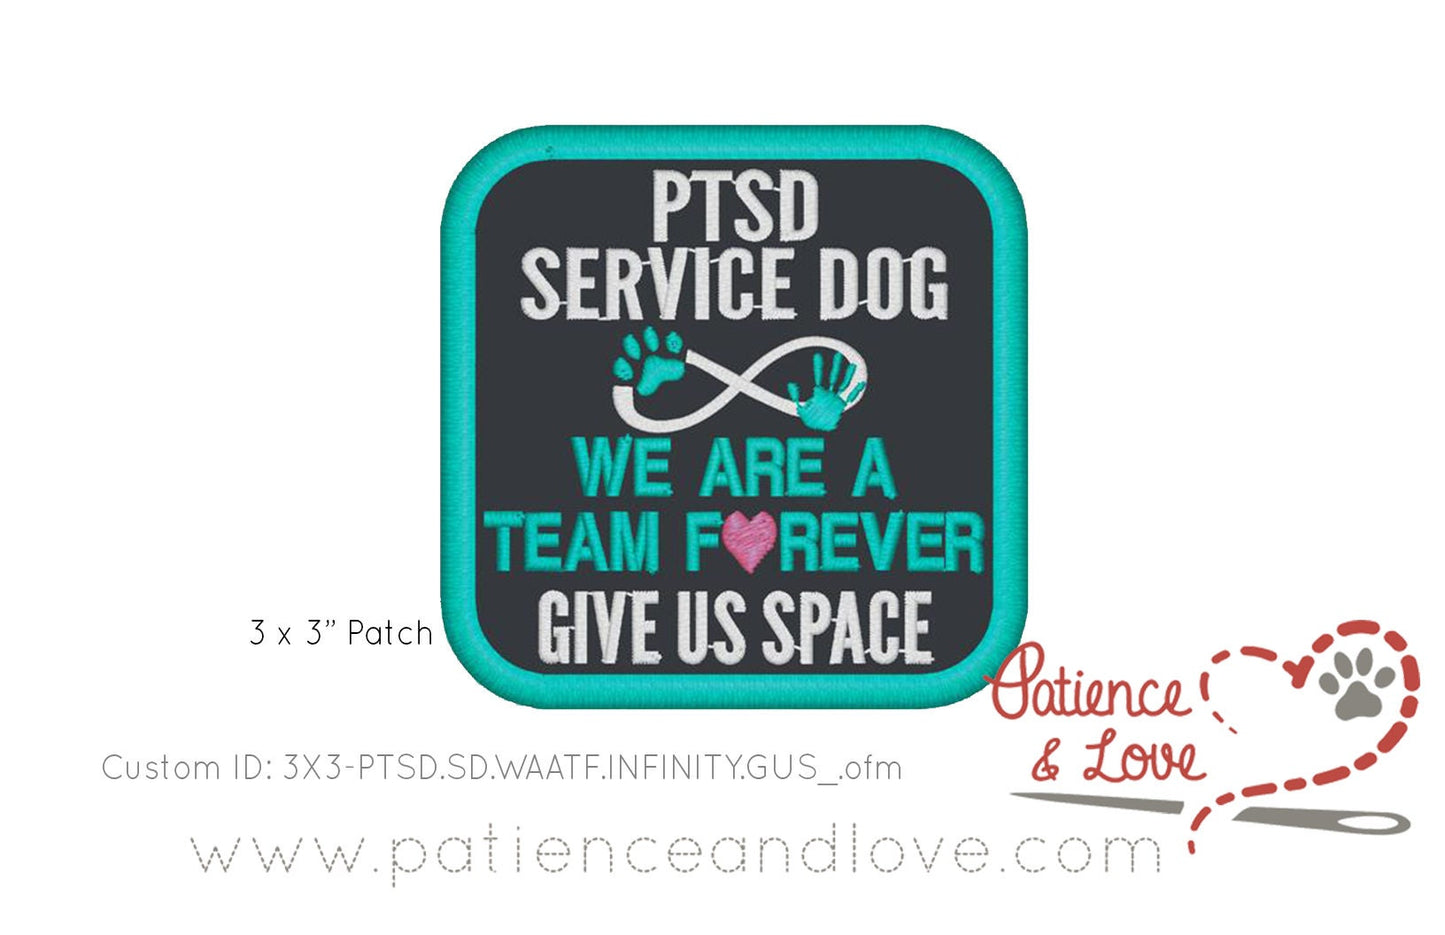 PTSD service dog, we are a team forever, give us space, with infinity and paw, 3 x 3", square patch